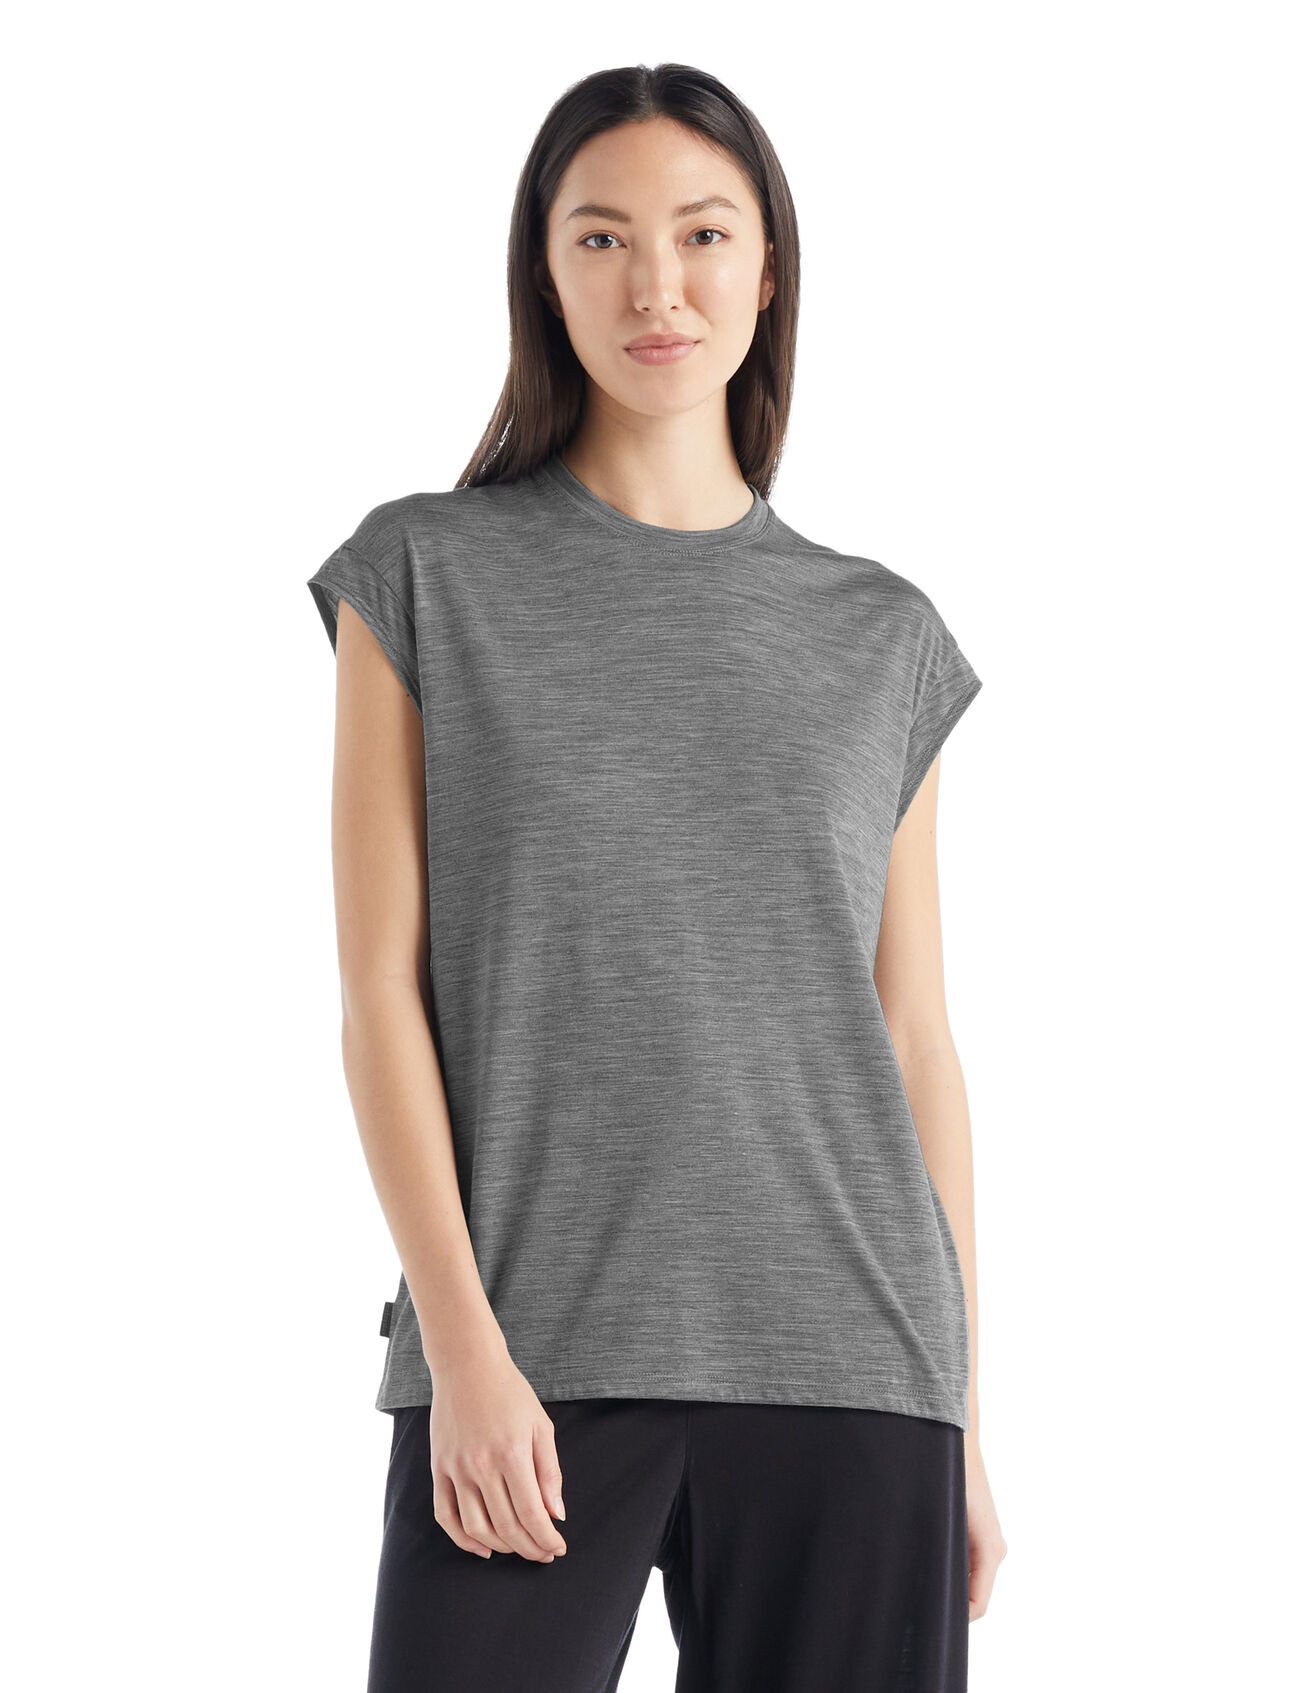 Womens Merino Drayden Sleeveless Top A comfy, everyday shirt made with our Cool-Lite™ blend of merino wool and TENCEL™, the Drayden Sleeveless Top offers natural breathability and softness with unique style.